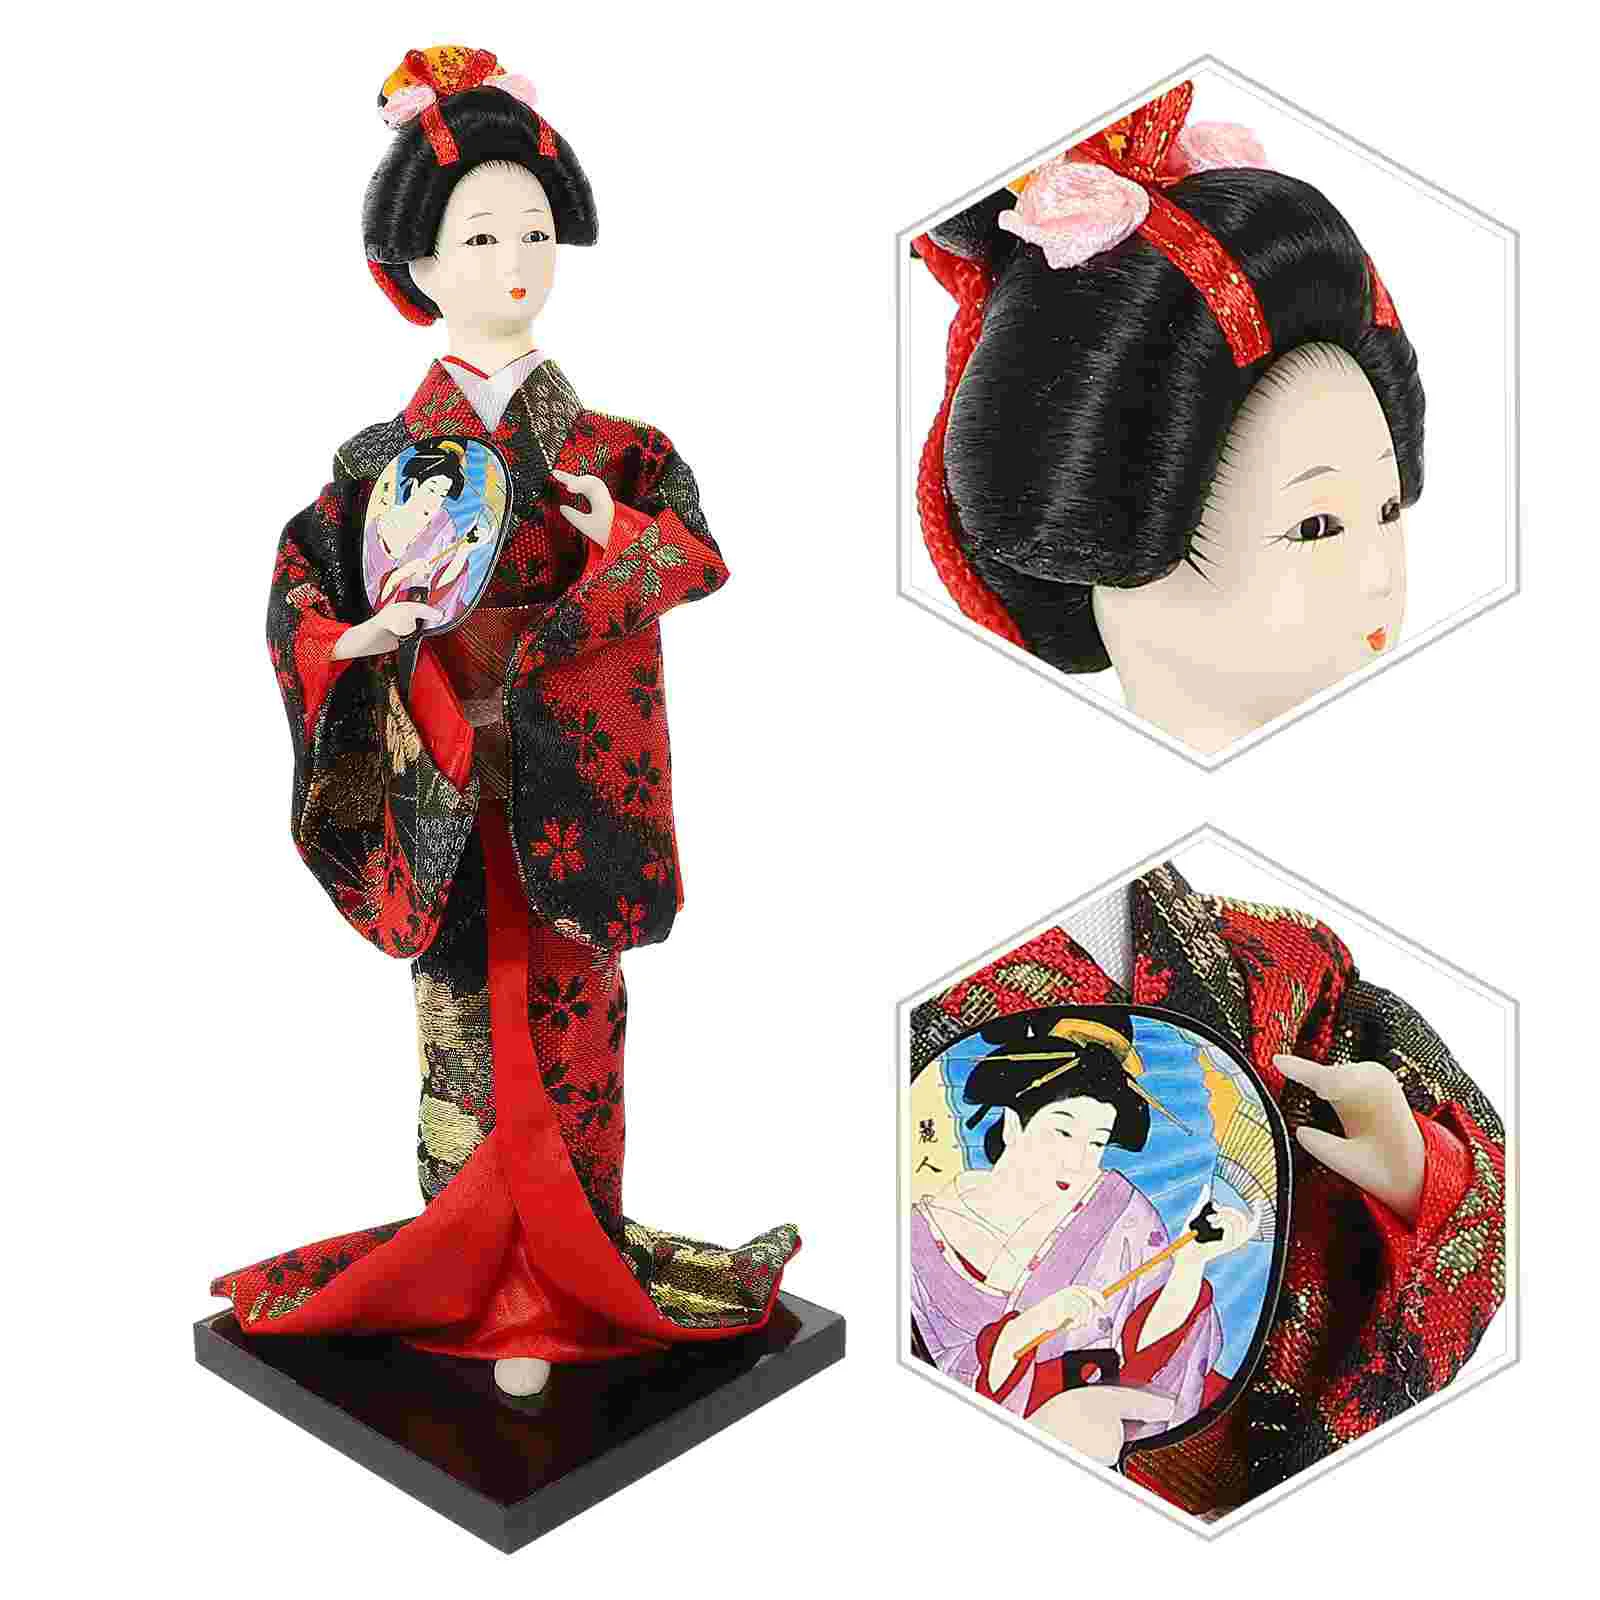 

Japanese Doll Folk Geisha Figurine Set Piece Girl Kimono Doll Arts And Crafts Accessories Decorate The Table With Random Colors